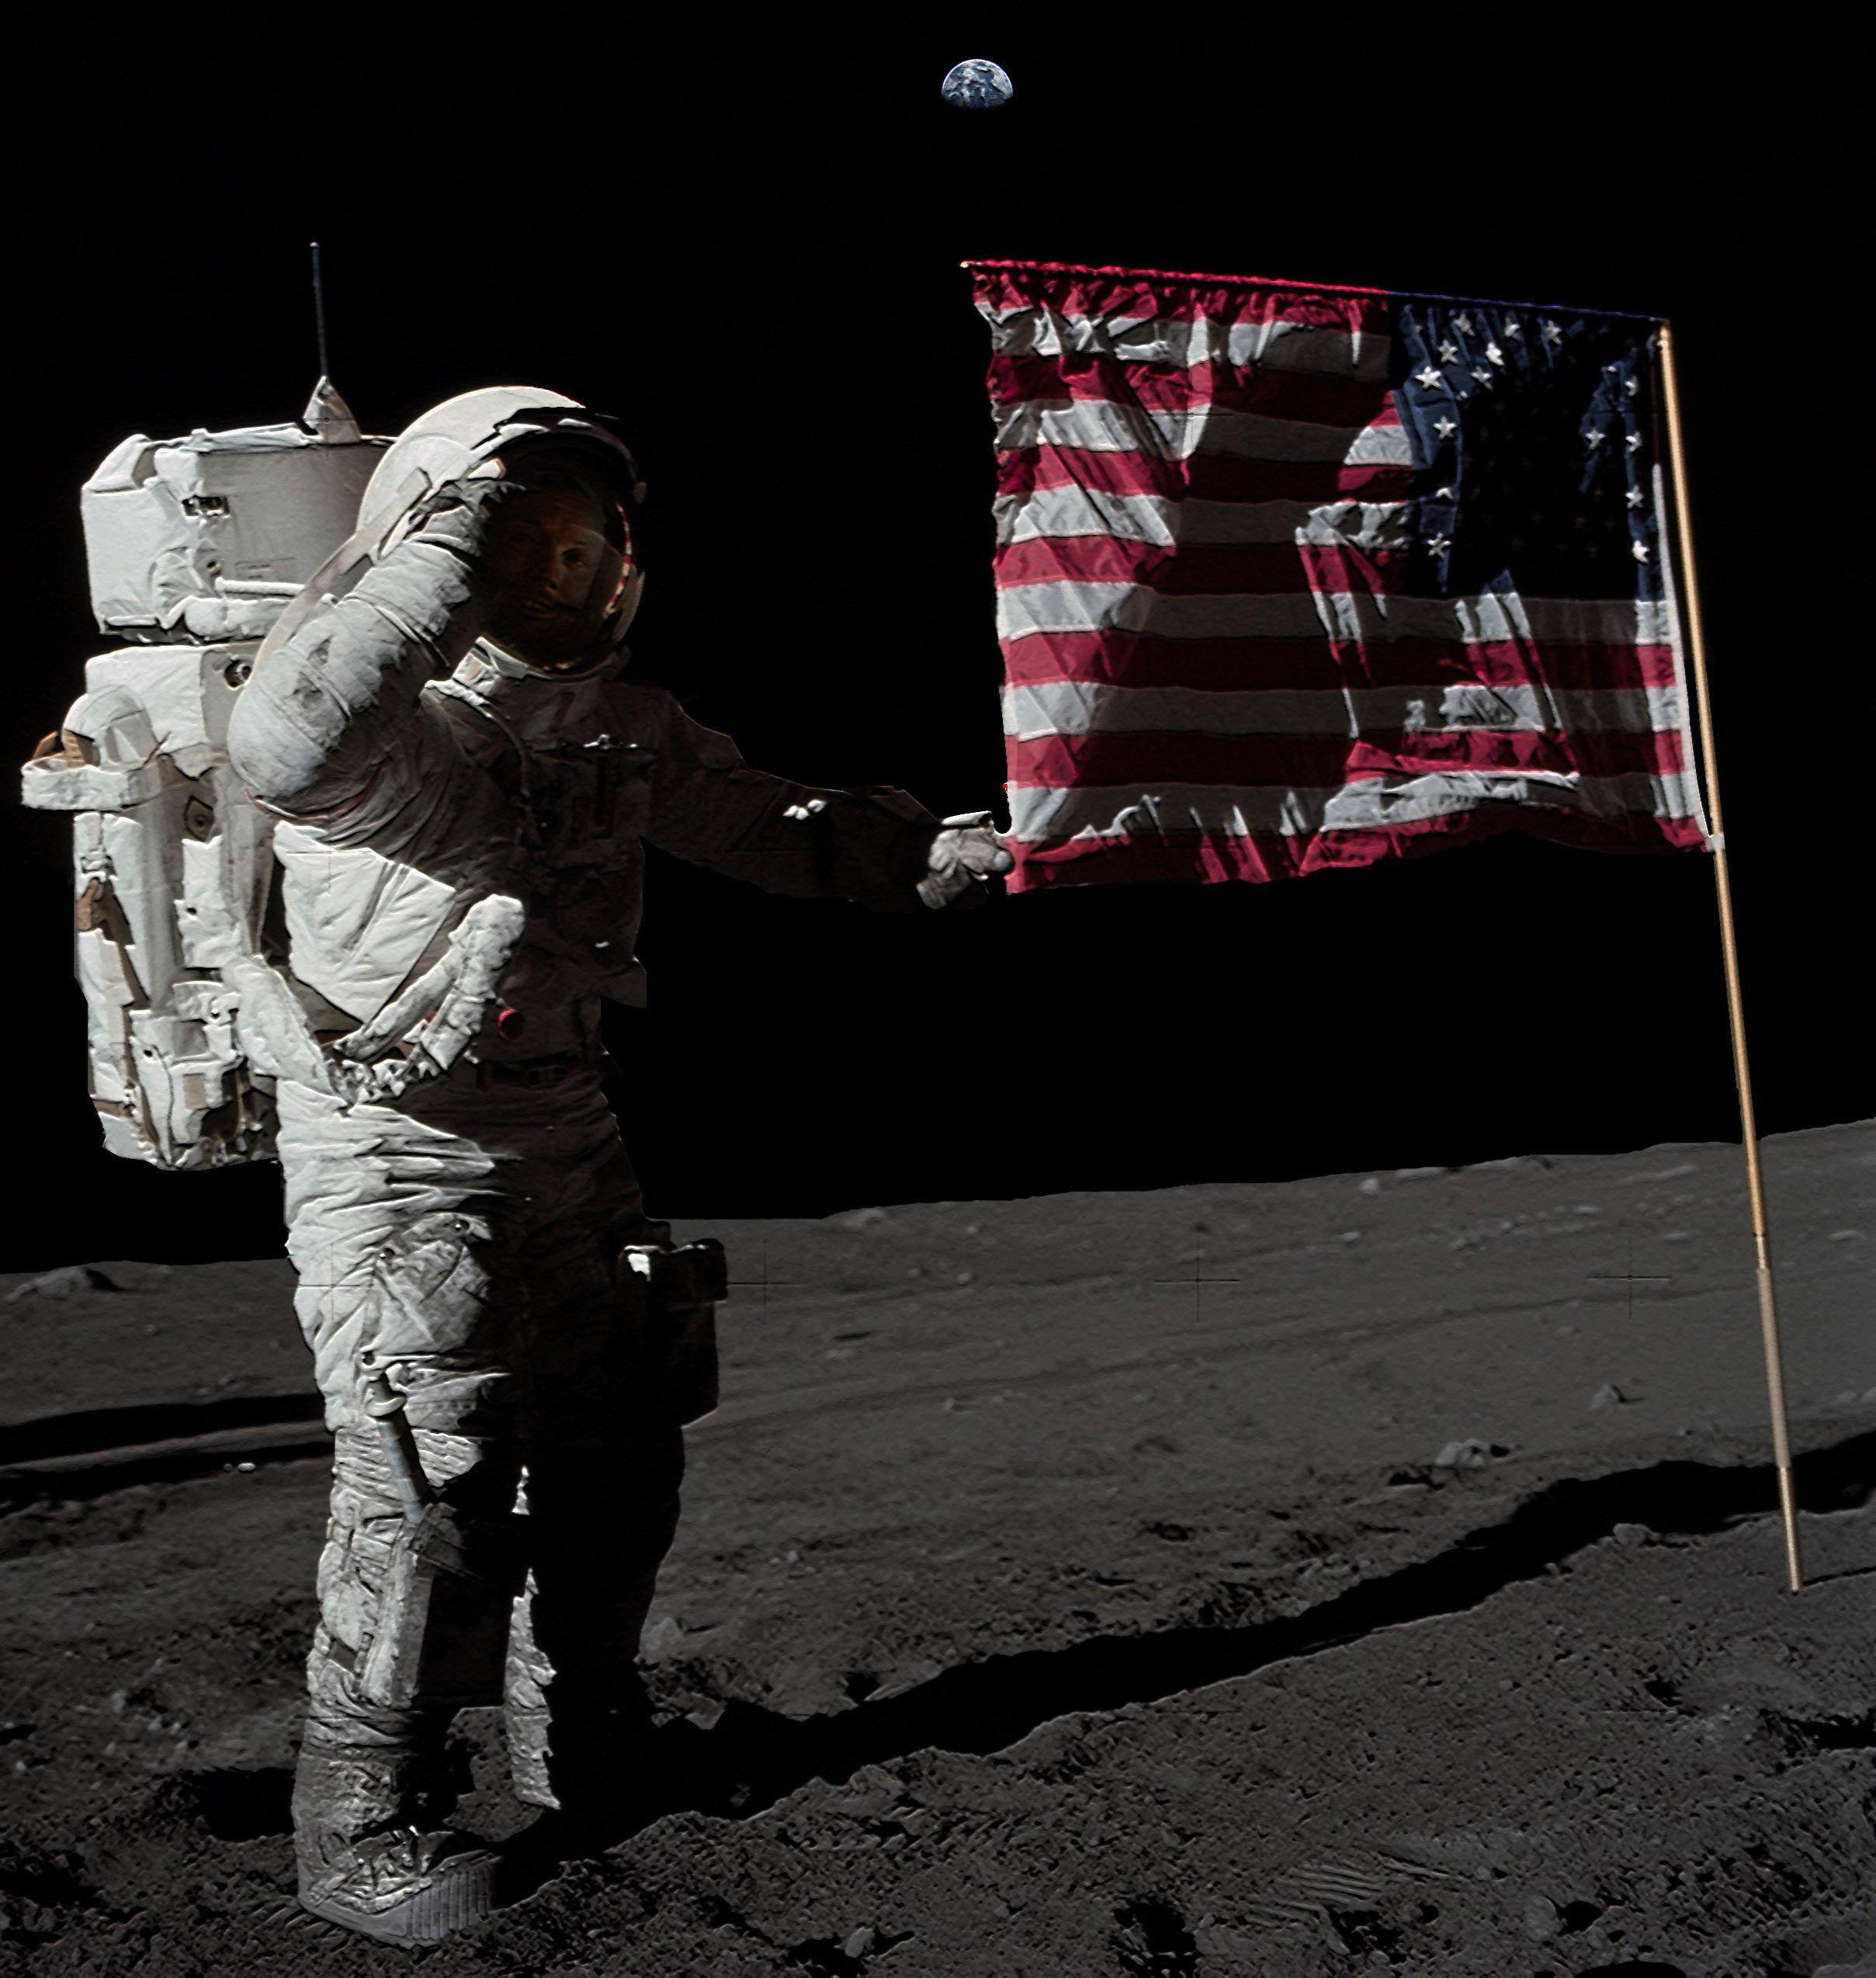 RIP Neil Armstrong, A Huge Loss for Mankind. Space